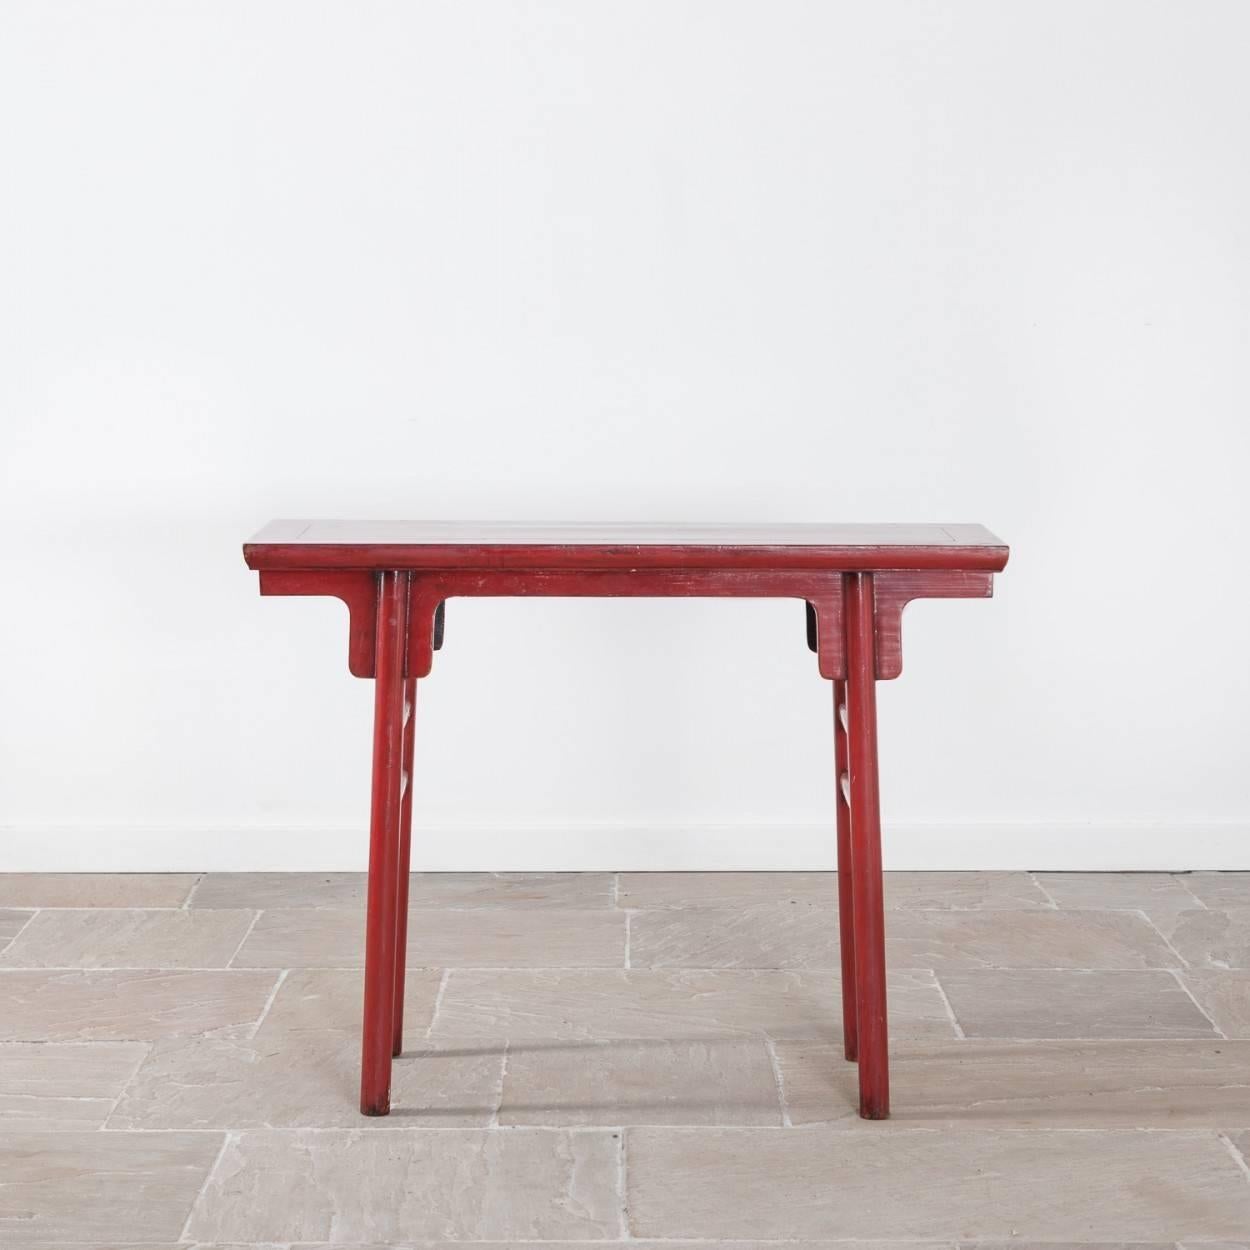 This is an early 20th century lacquered Chinese altar table which is a perfect size for a small console table.

It is in good overall condition with a few very small marks and scratches.

Measure: 84.5cm high, 110cm wide and 40cm deep.